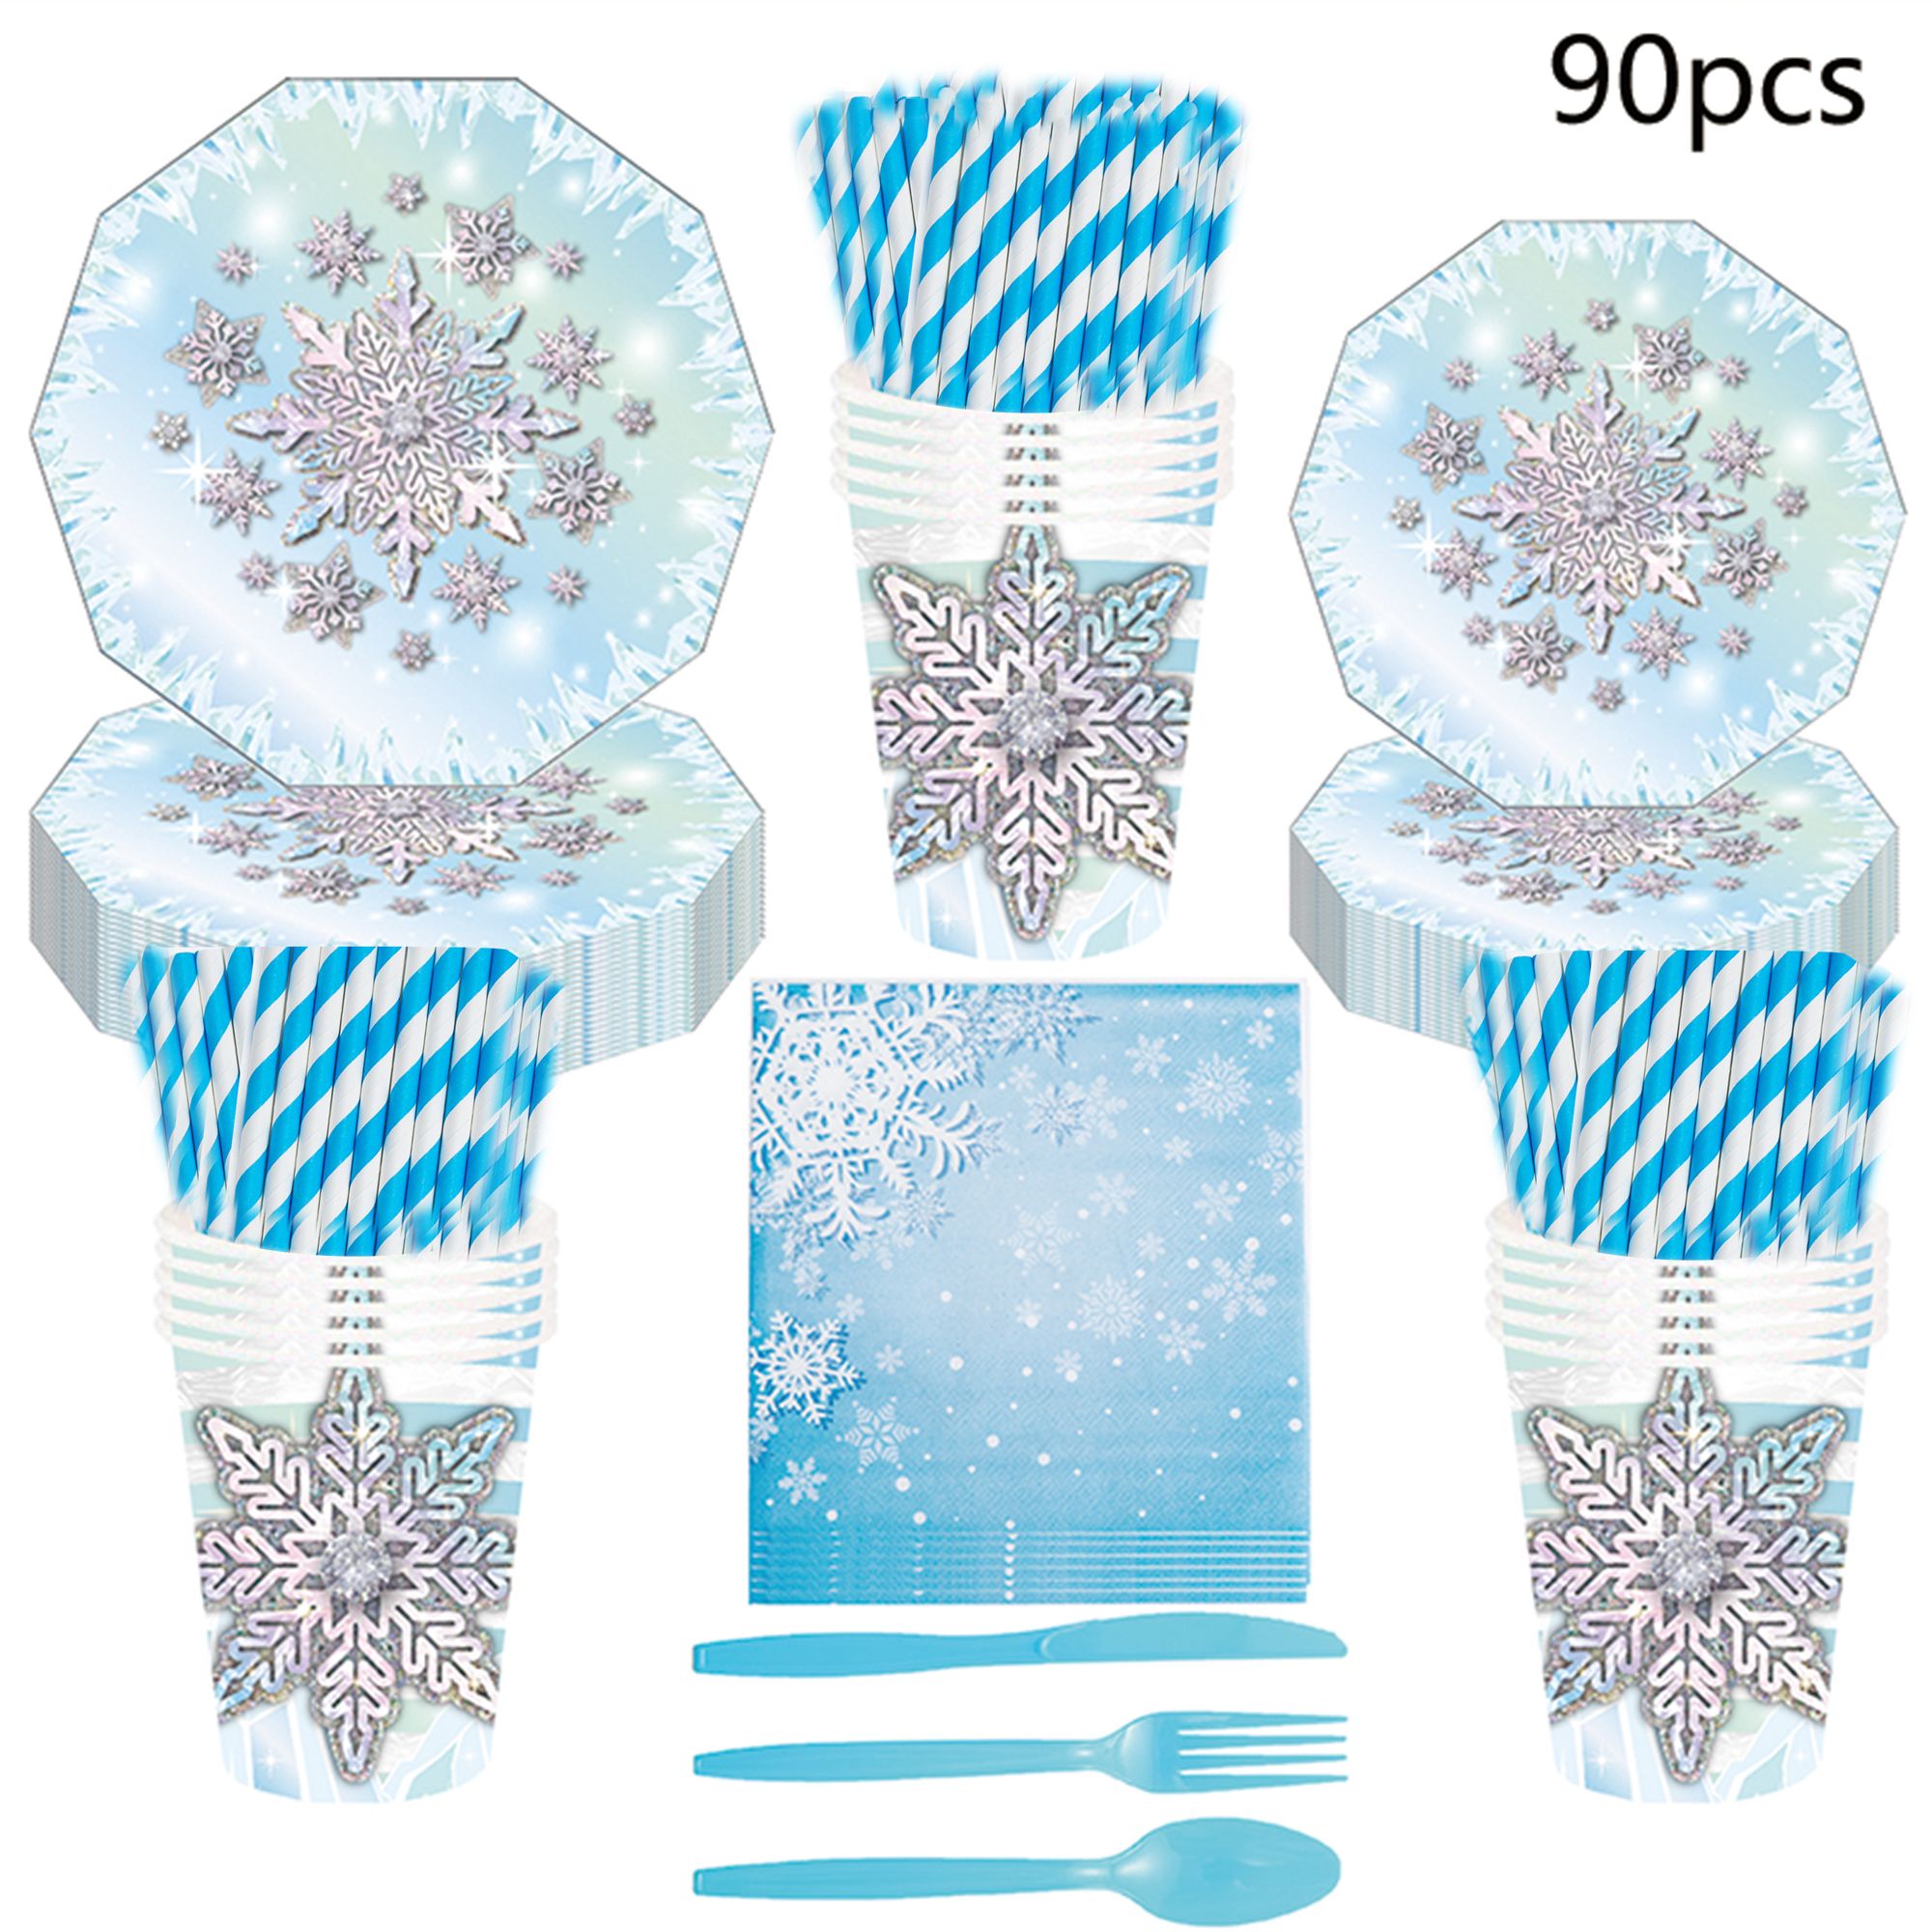 Snowflake Themed Birthday Party Decoration Set with Snow Castle Paper Plates, Cups, Napkins, and Str